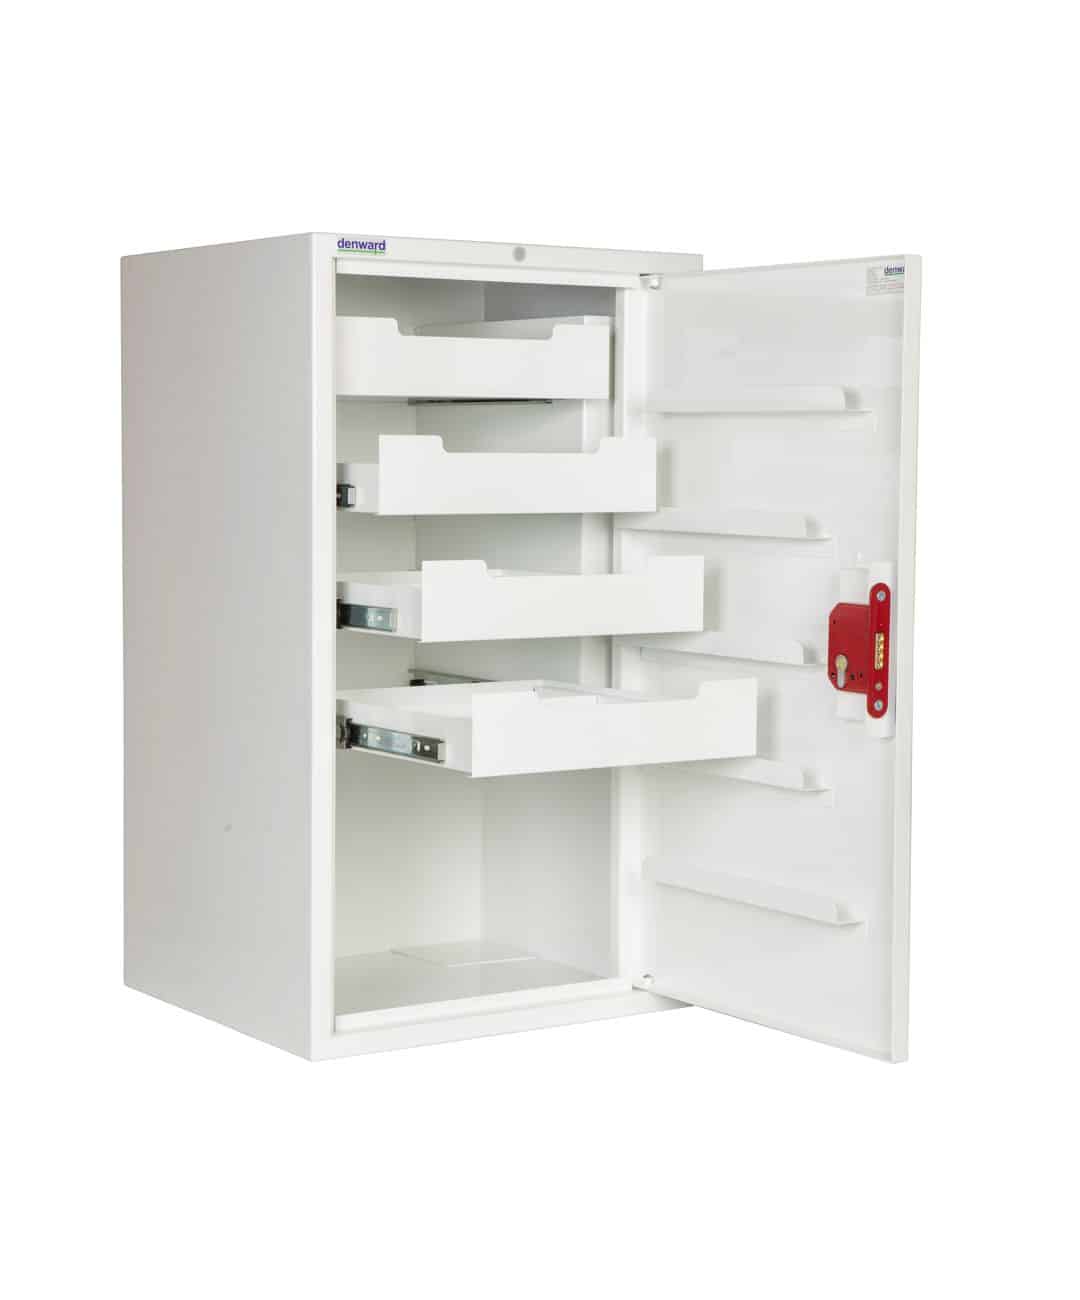 Controlled Drug Cabinet (CDC850DP) W500 x H850 x D450